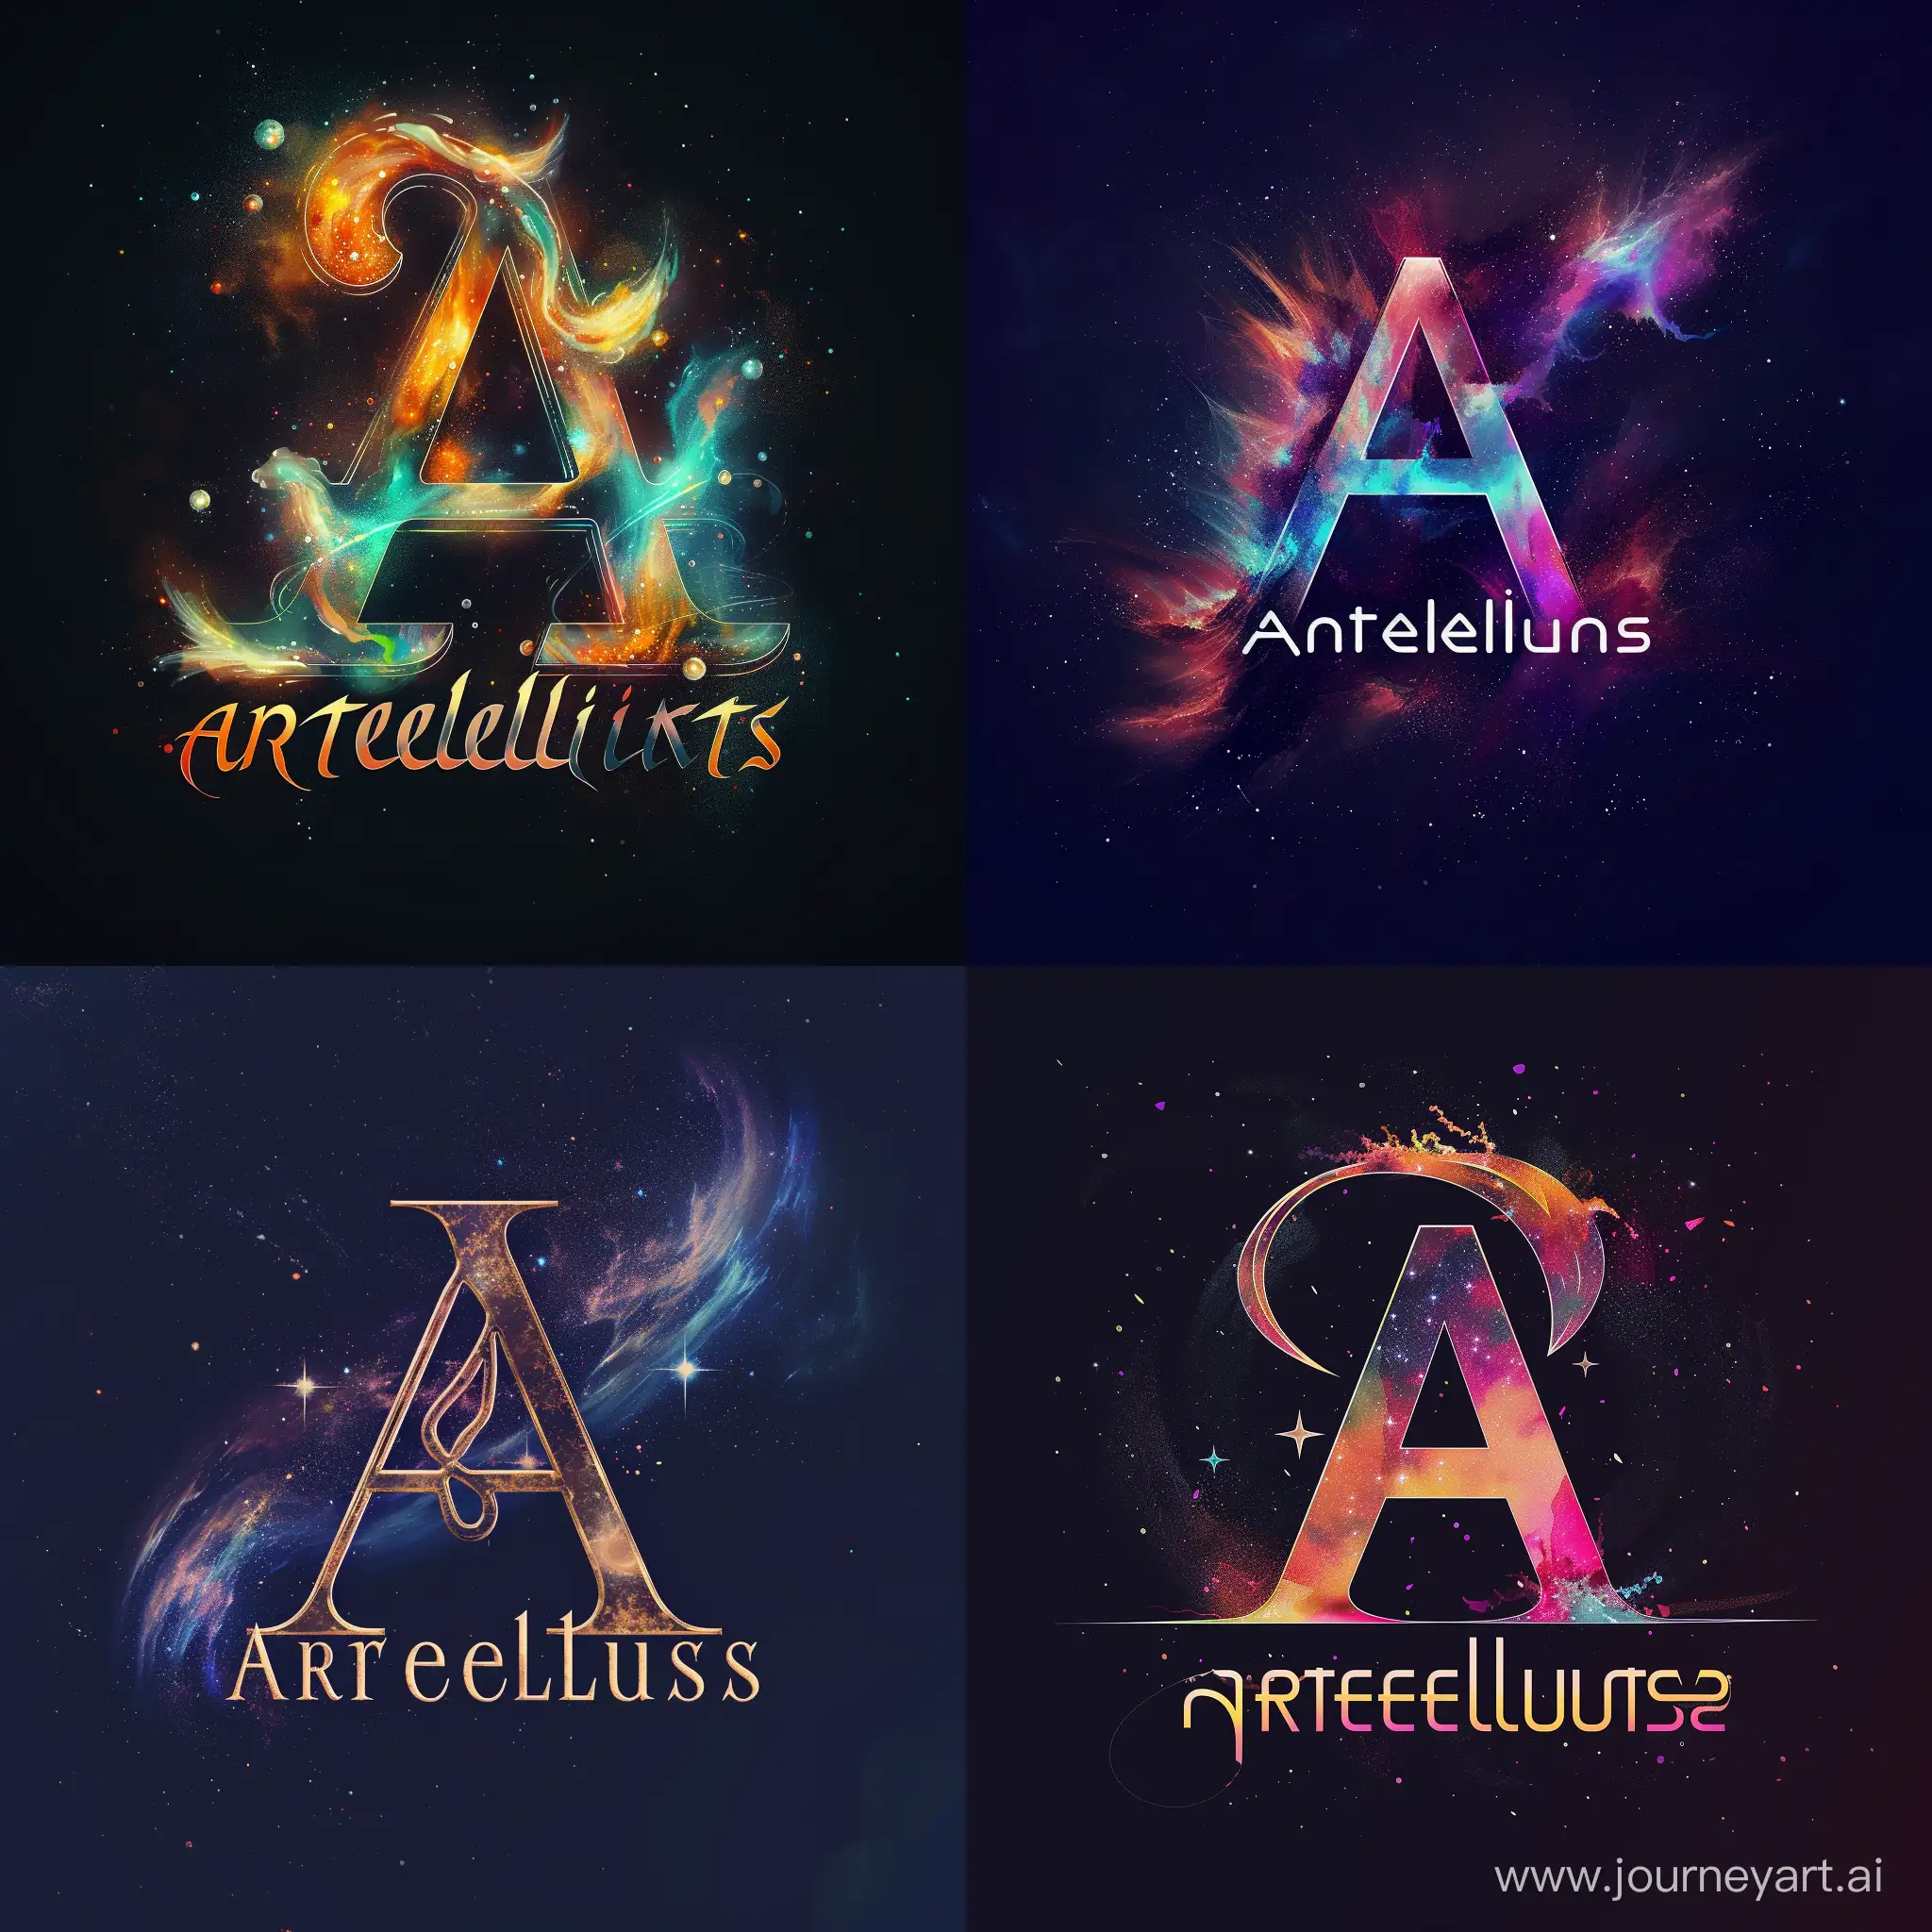 Create a dreamy logo with the text 'Artelusion'. Emphasize dream-like qualities with a touch of darkness and incorporate beautiful cosmic colors. The 'A' should be prominent and creative, and the rest of the letters should flow seamlessly with artistic flair. Feel free to integrate celestial elements such as stars and nebulas, while maintaining an elegant and sophisticated aesthetic. The overall design should evoke a sense of wonder and mystery. Remember to prioritize legibility while infusing a dreamy and artistic feel into the logo